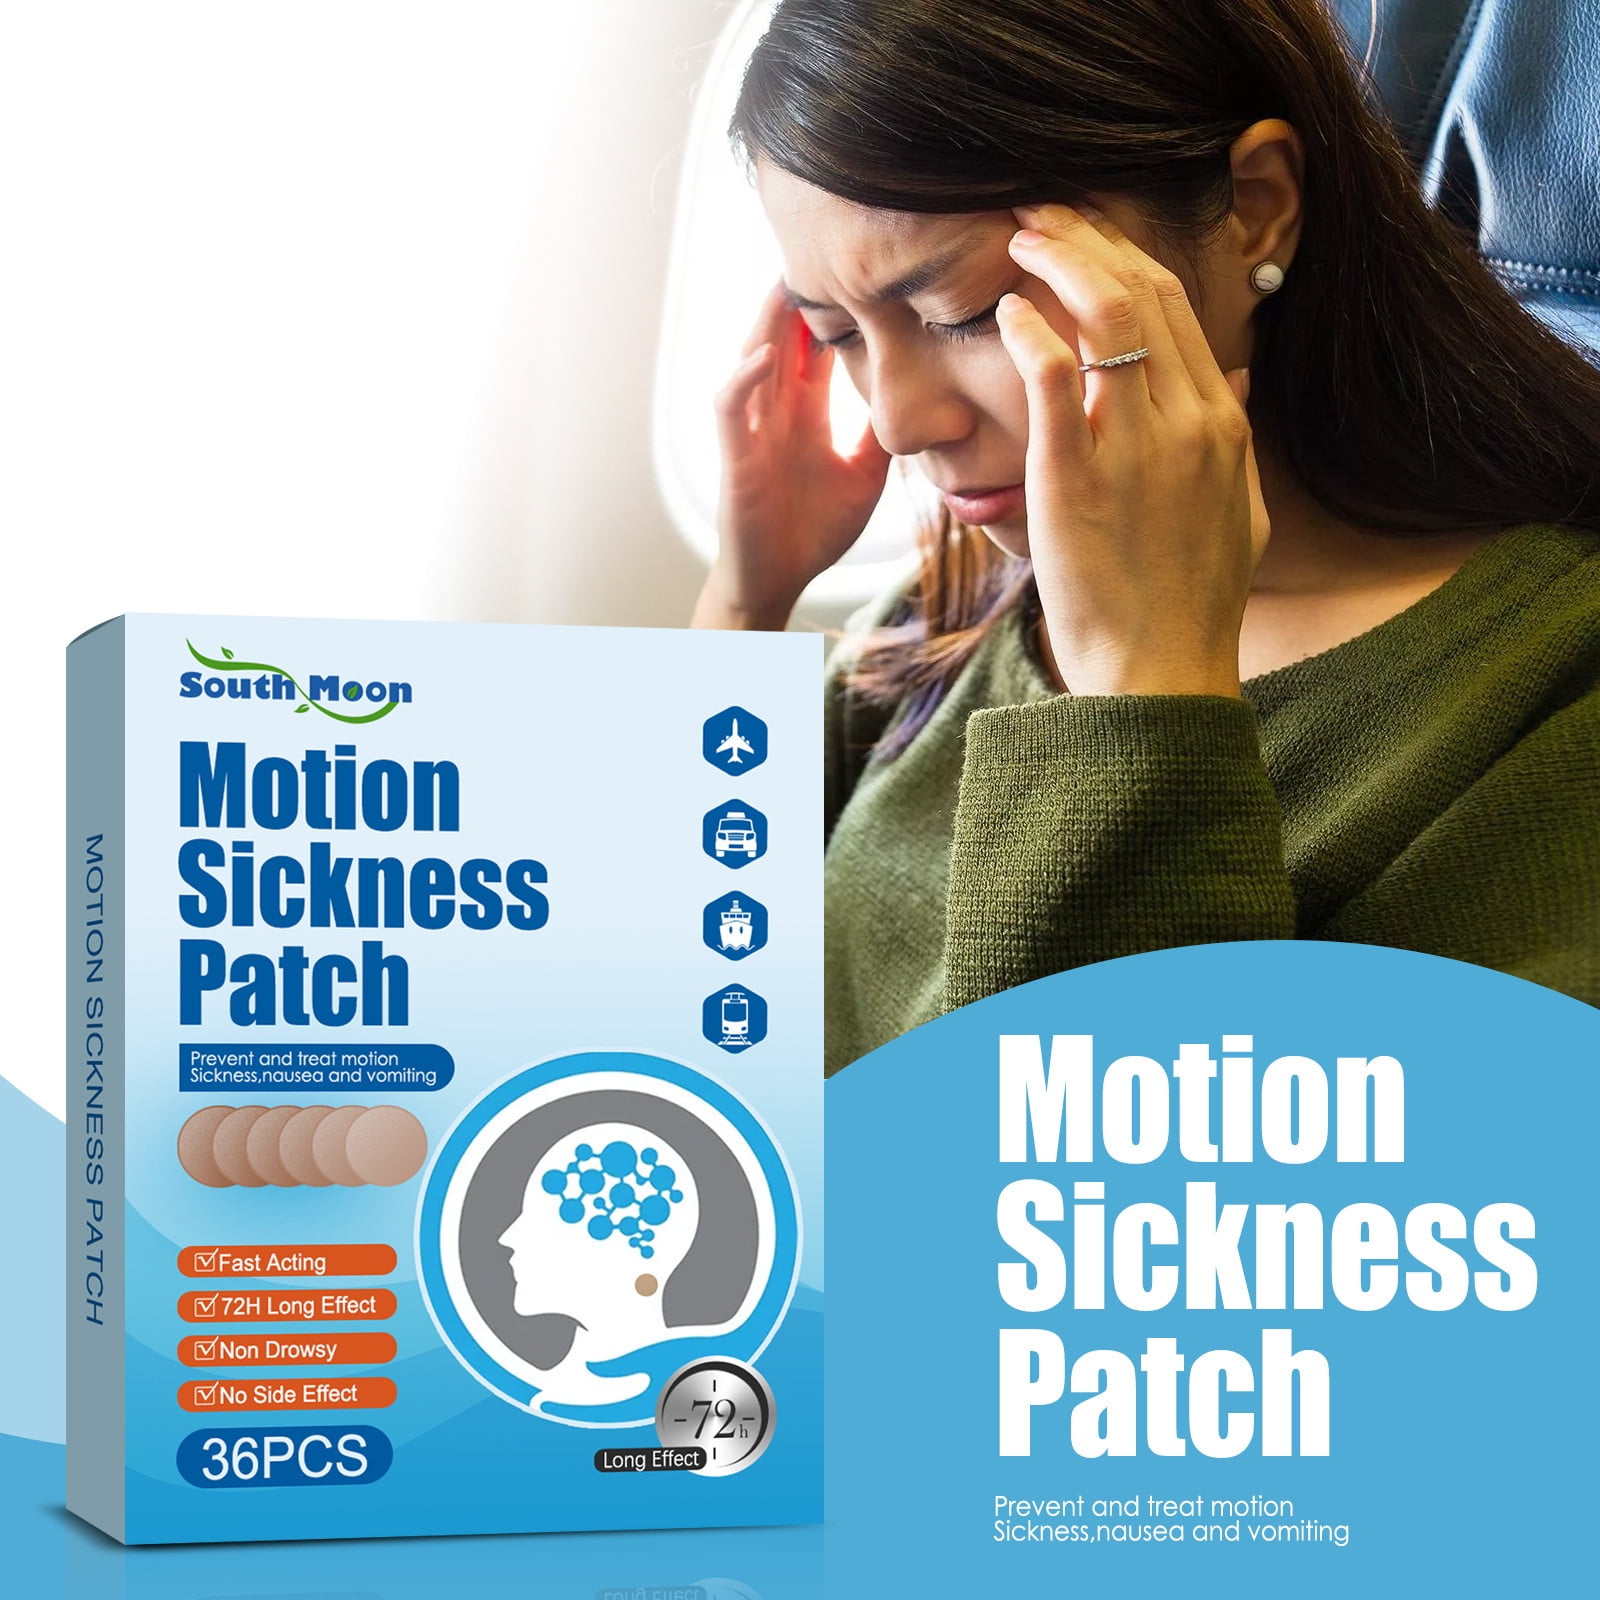 Lingouzi Motion Sickness Patch Anti nausea Seasickness Relieve Vomiting Nausea Dizziness Caused By Car Ship Plane Travel Fast Acting And No Side Effe fed08a82 3223 49bd 9a84 c6b506355070.6ee3c9a757800563f9f49c86c7417658